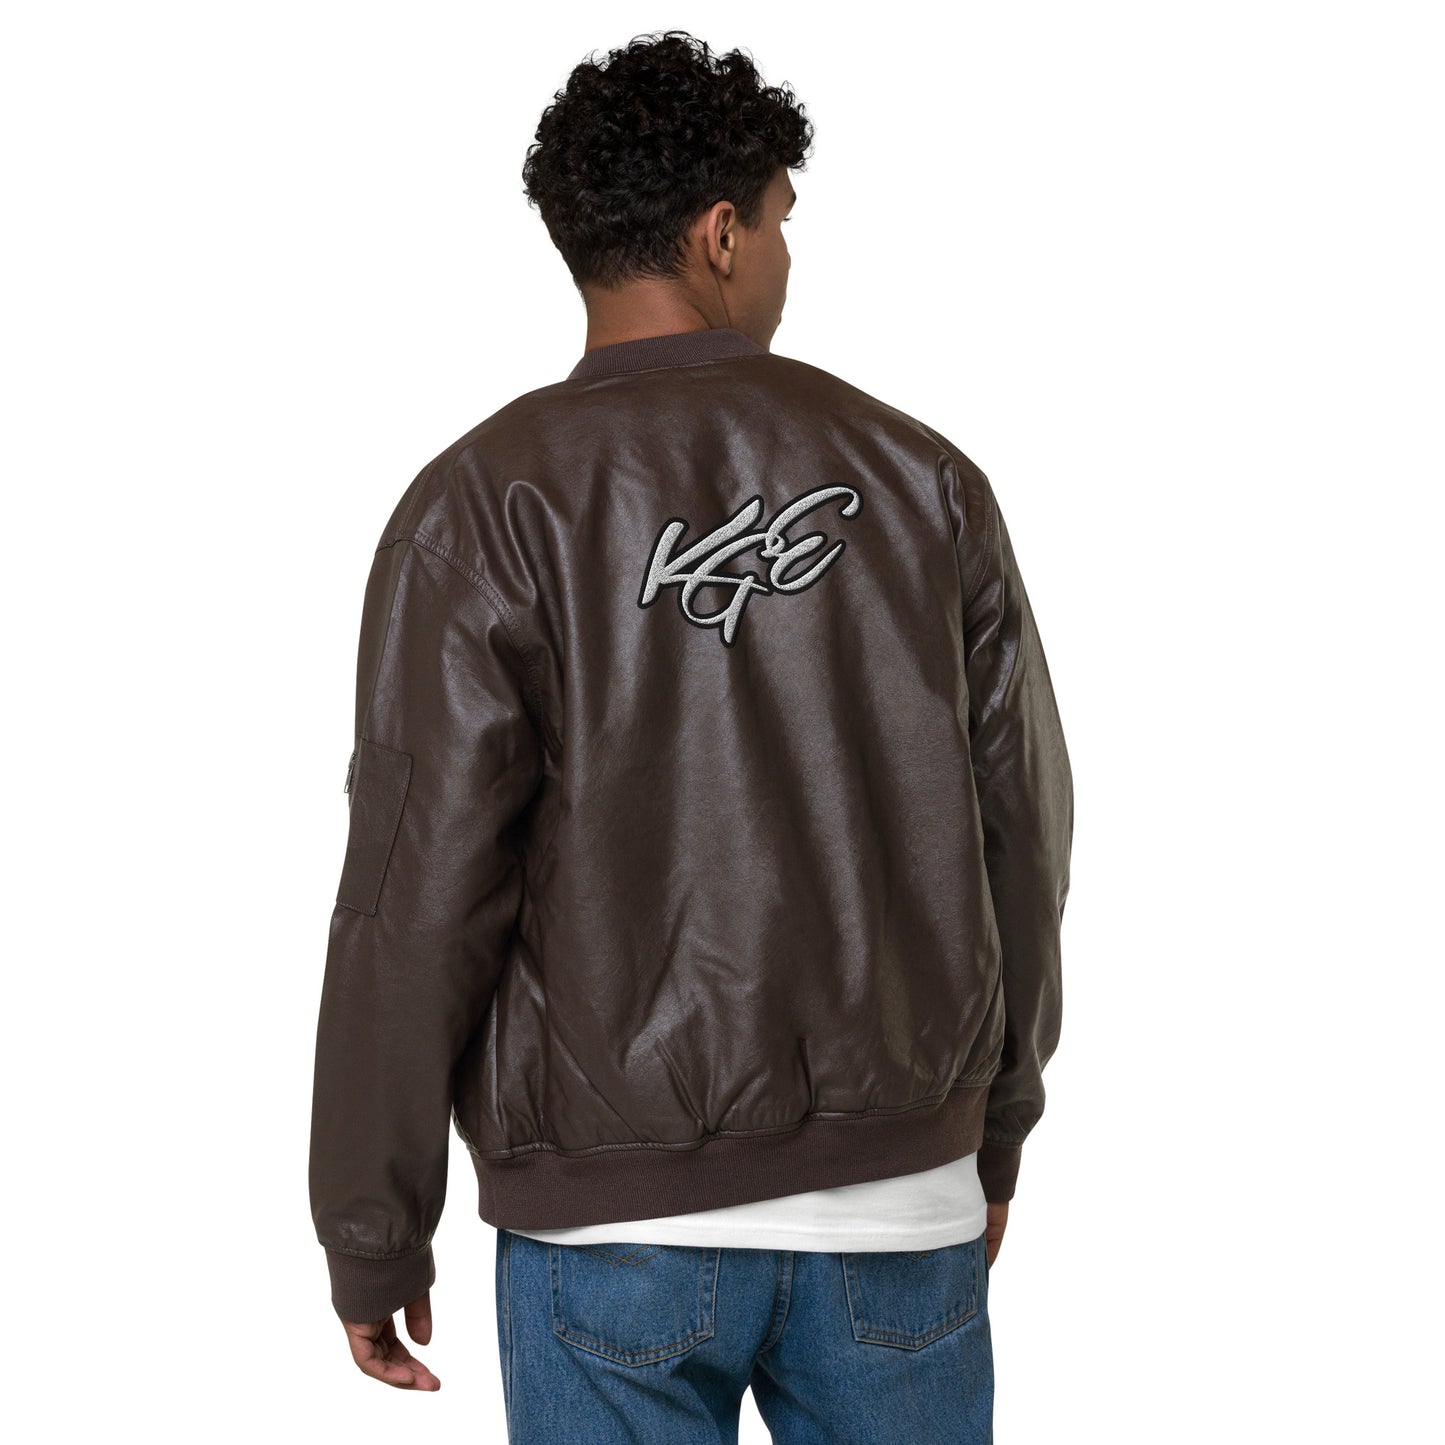 (New) KGE Signature Embroidery PU Leather Bomber Jacket